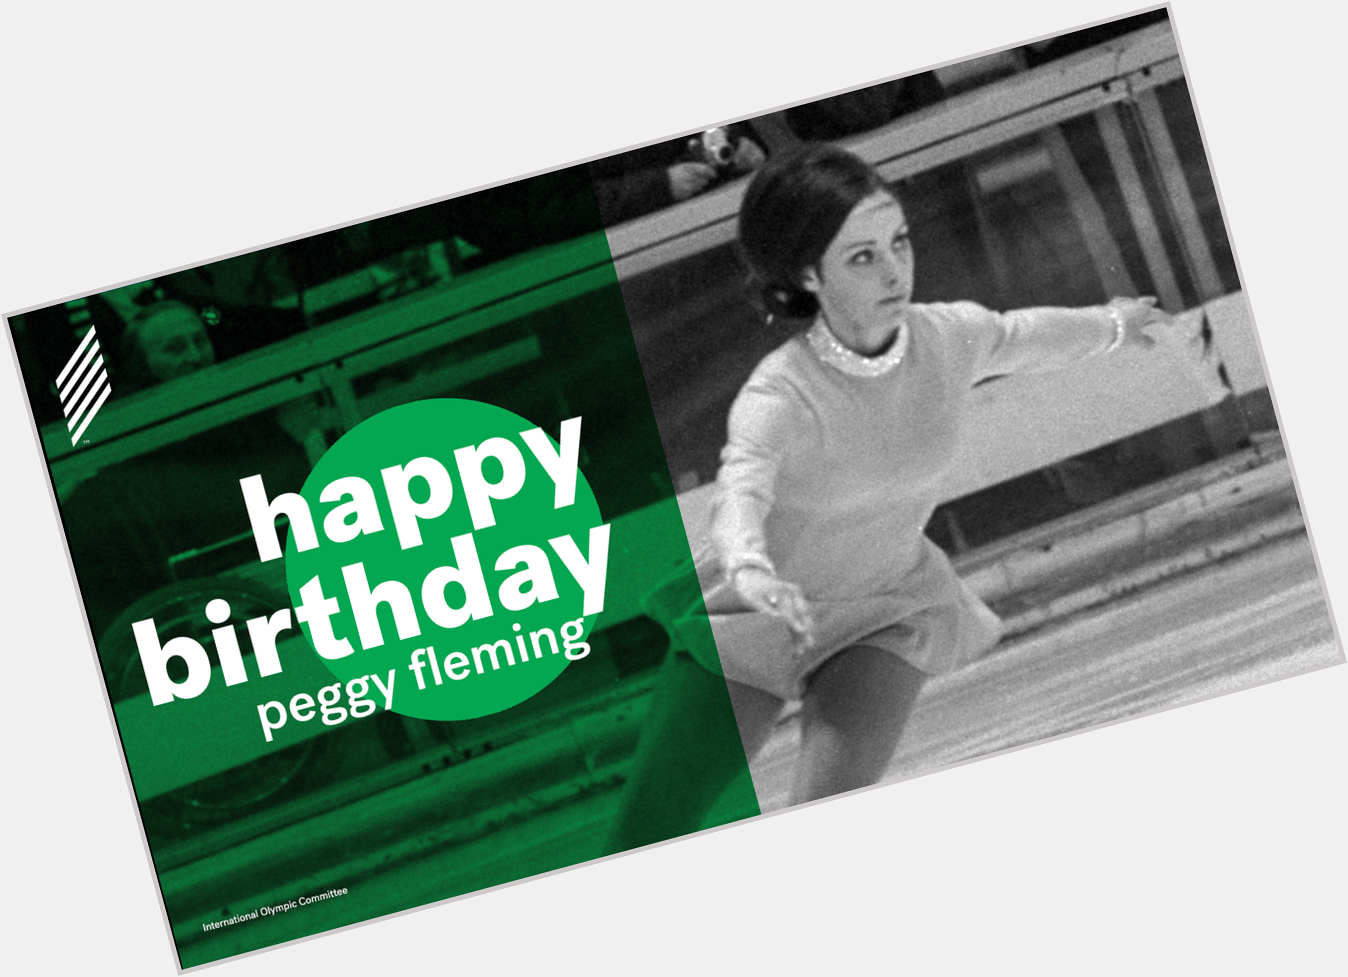 Happy birthday to 1968 Olympic champion, Peggy Fleming: 